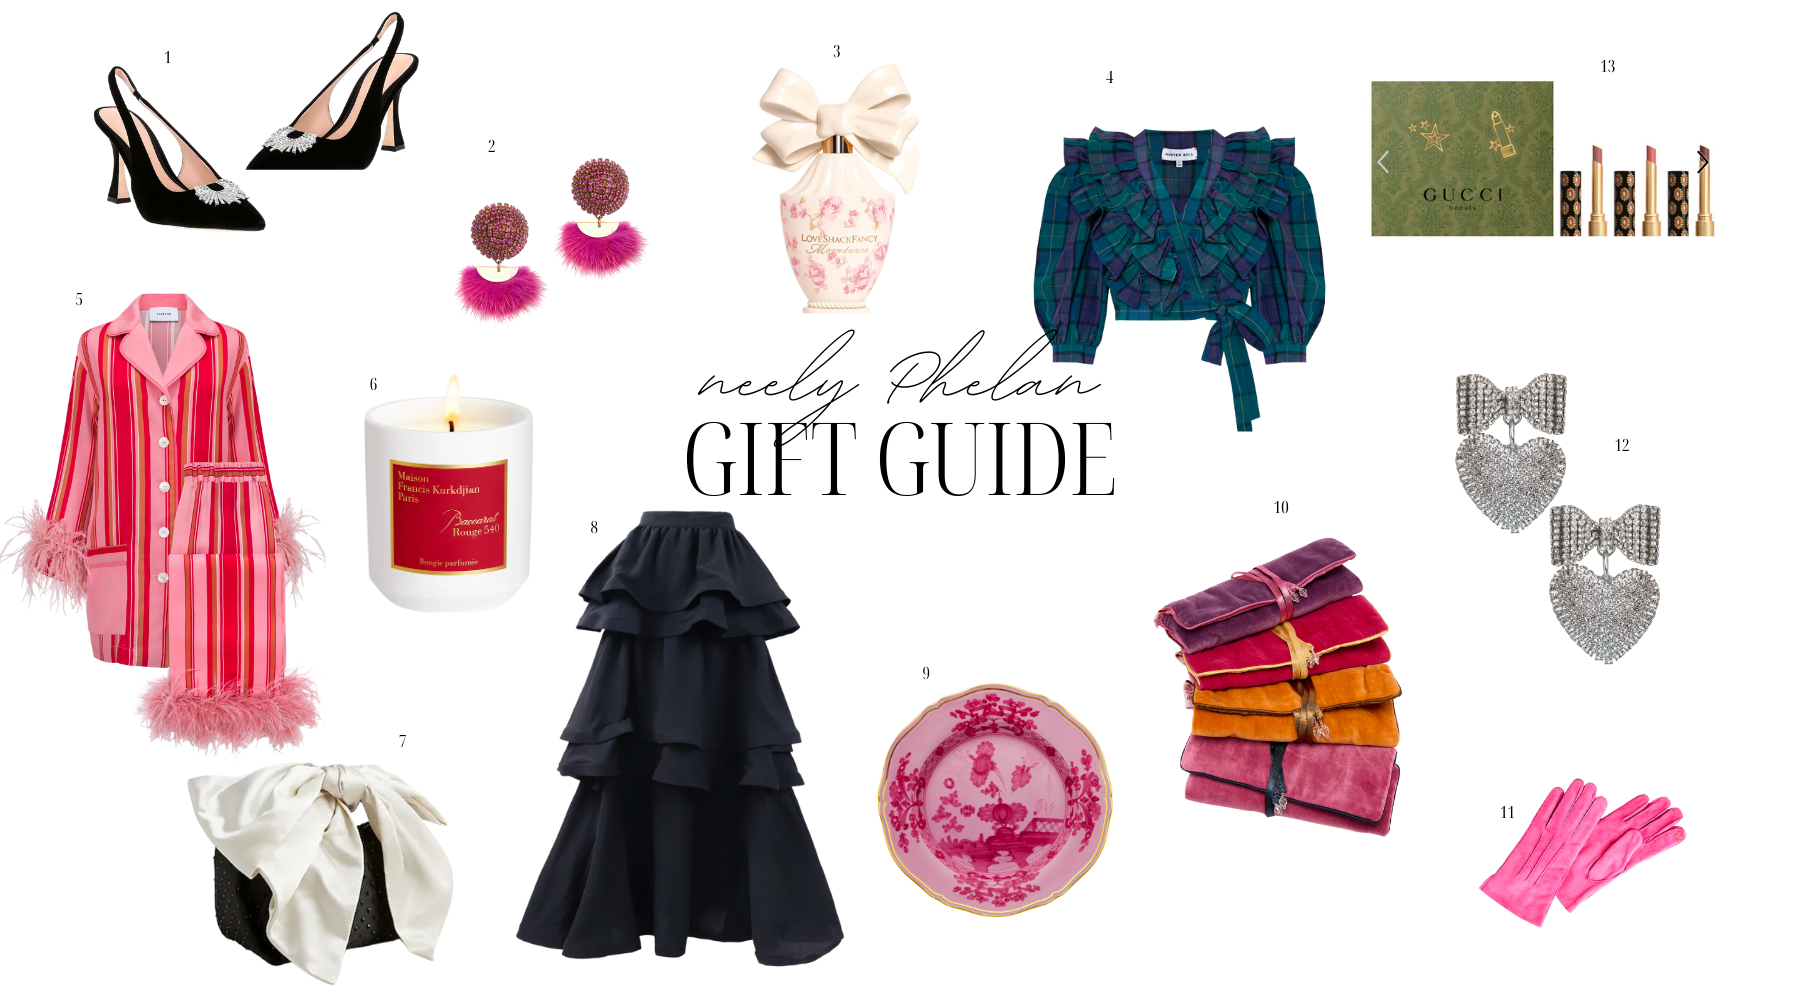 Neely Phelan Gift Guide for the Holidays